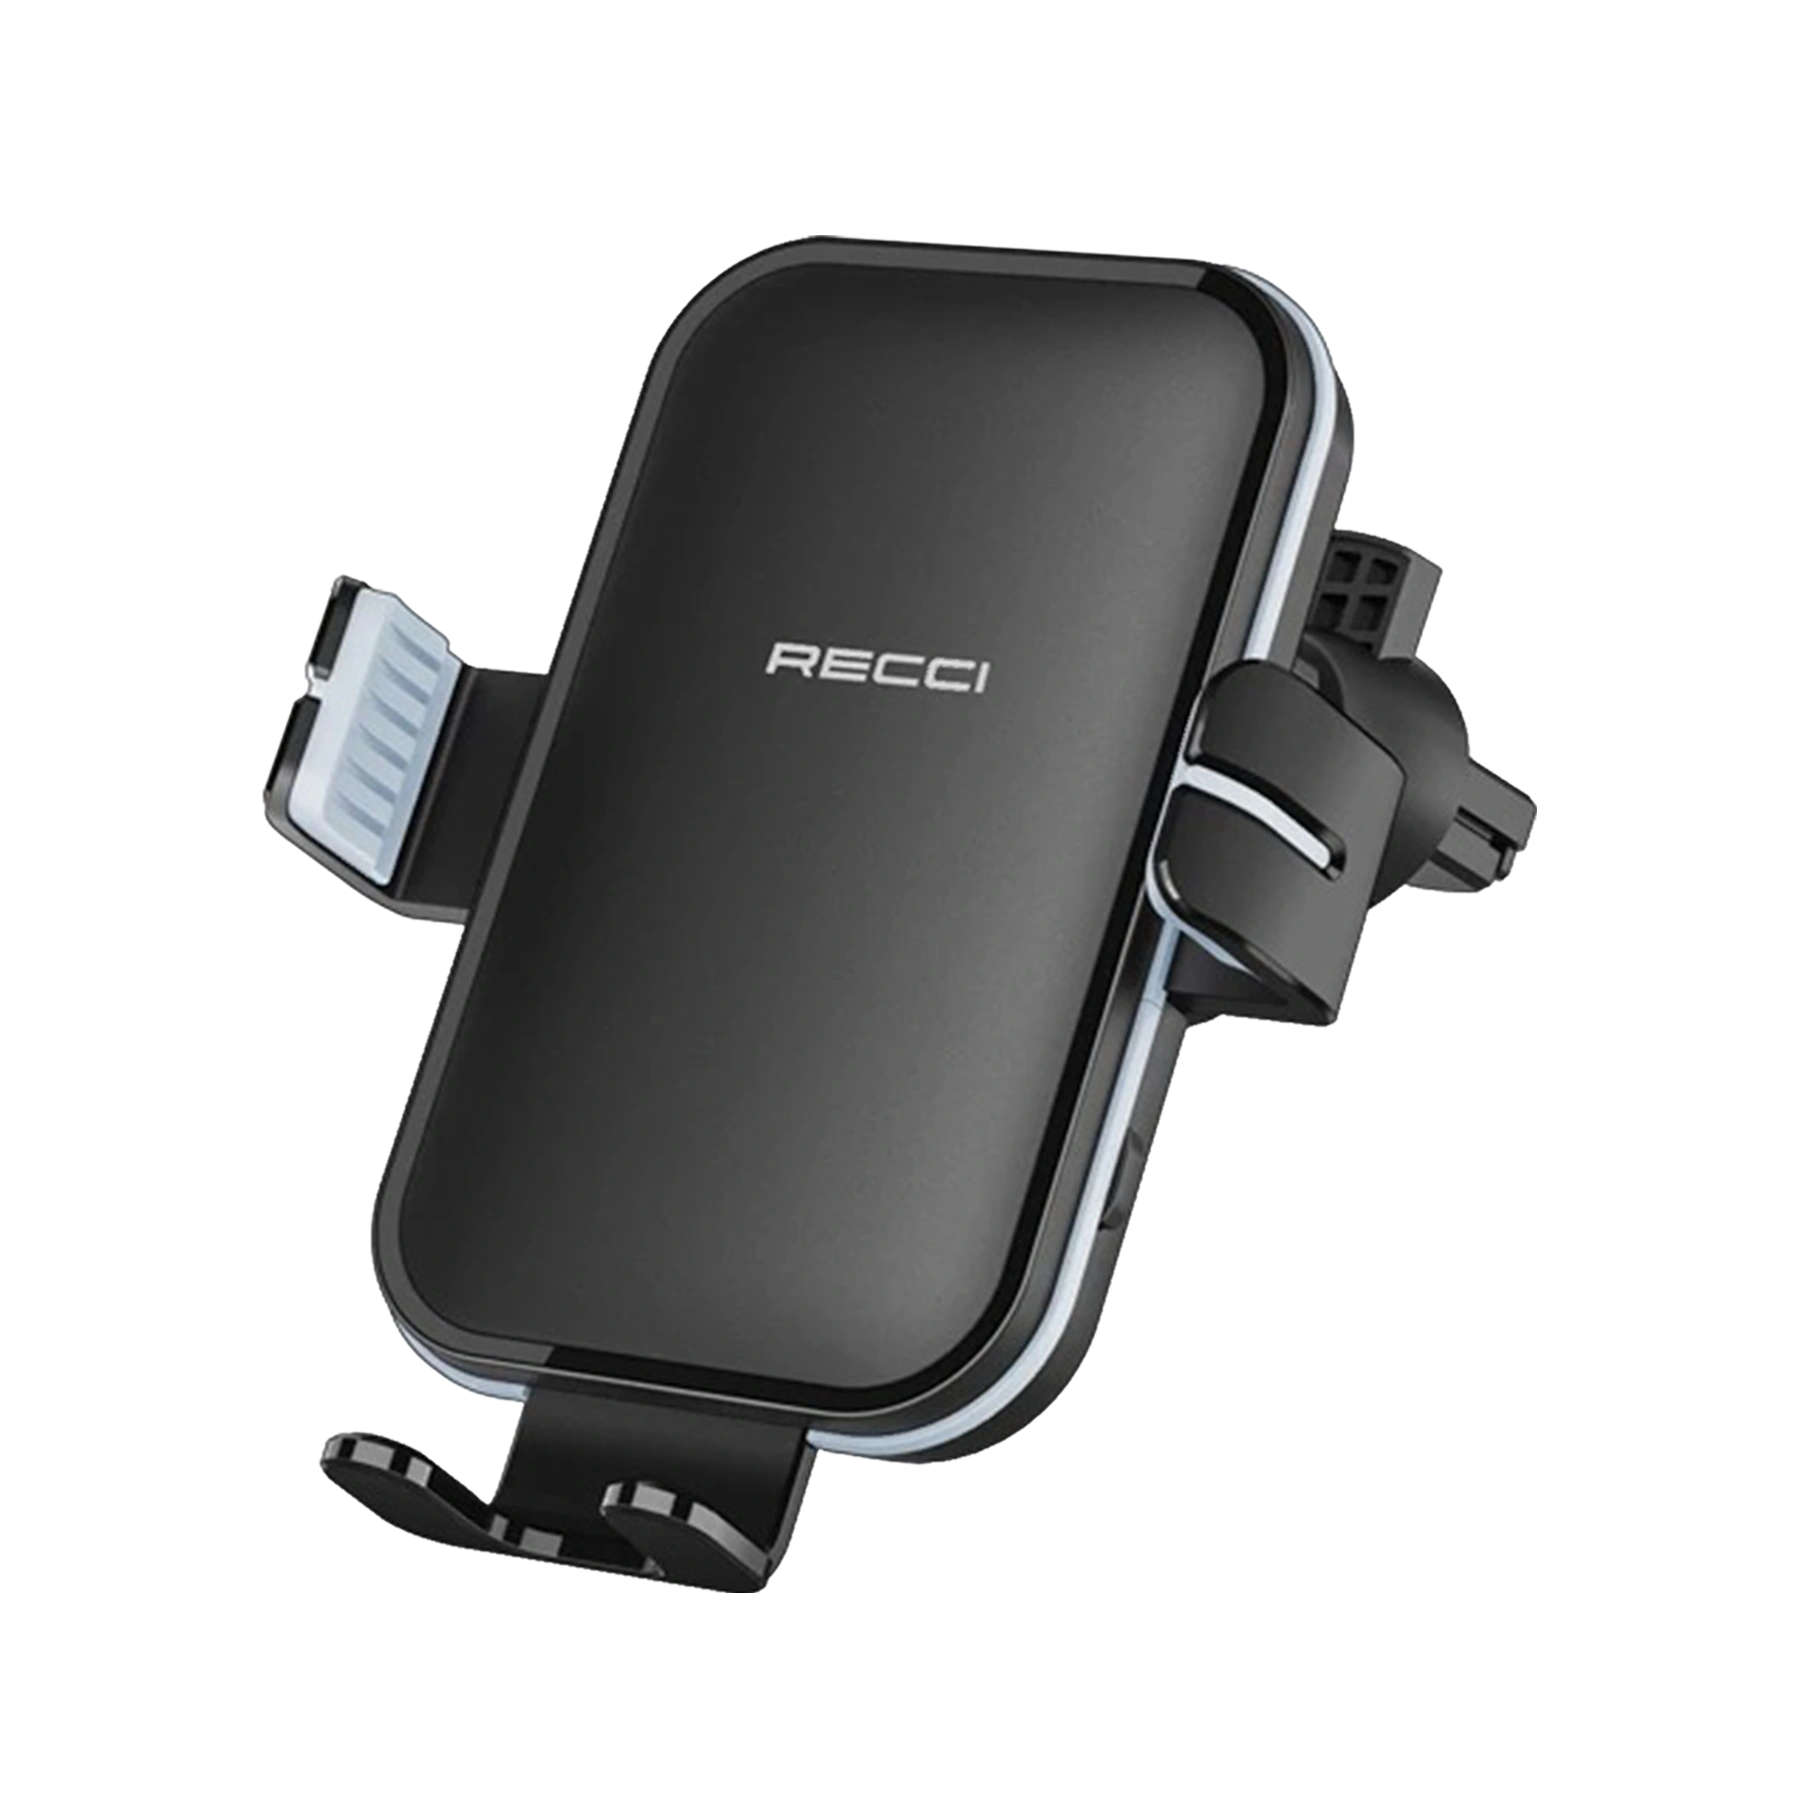 recci-richway-wireless-charger-car-holder-rho-c13